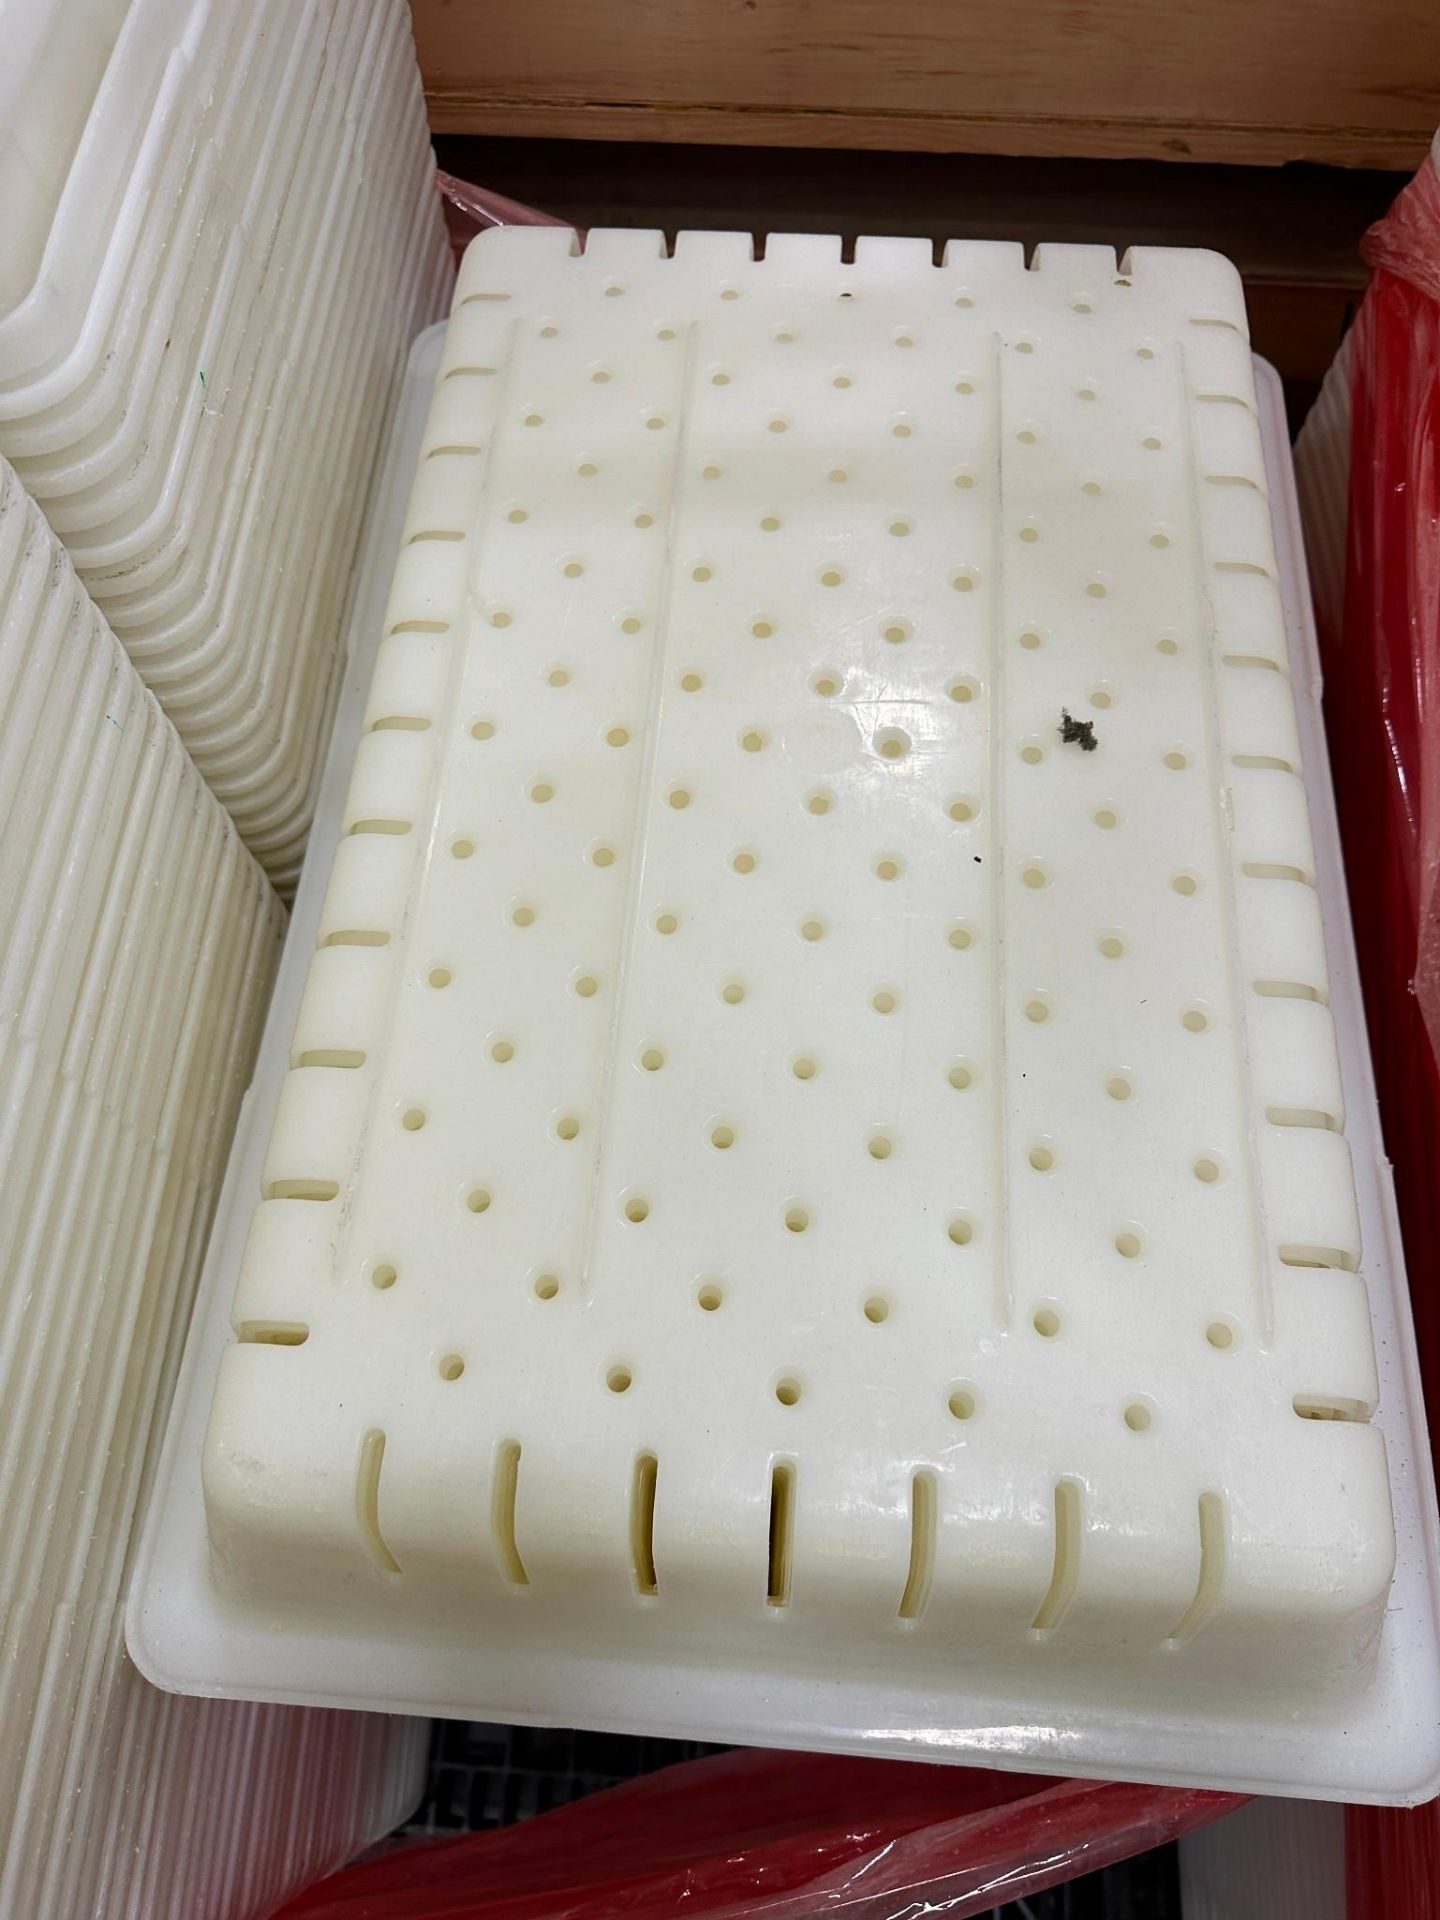 SKID OF FLAT AND PERFORATED PLASTIC TRAYS - Image 5 of 5